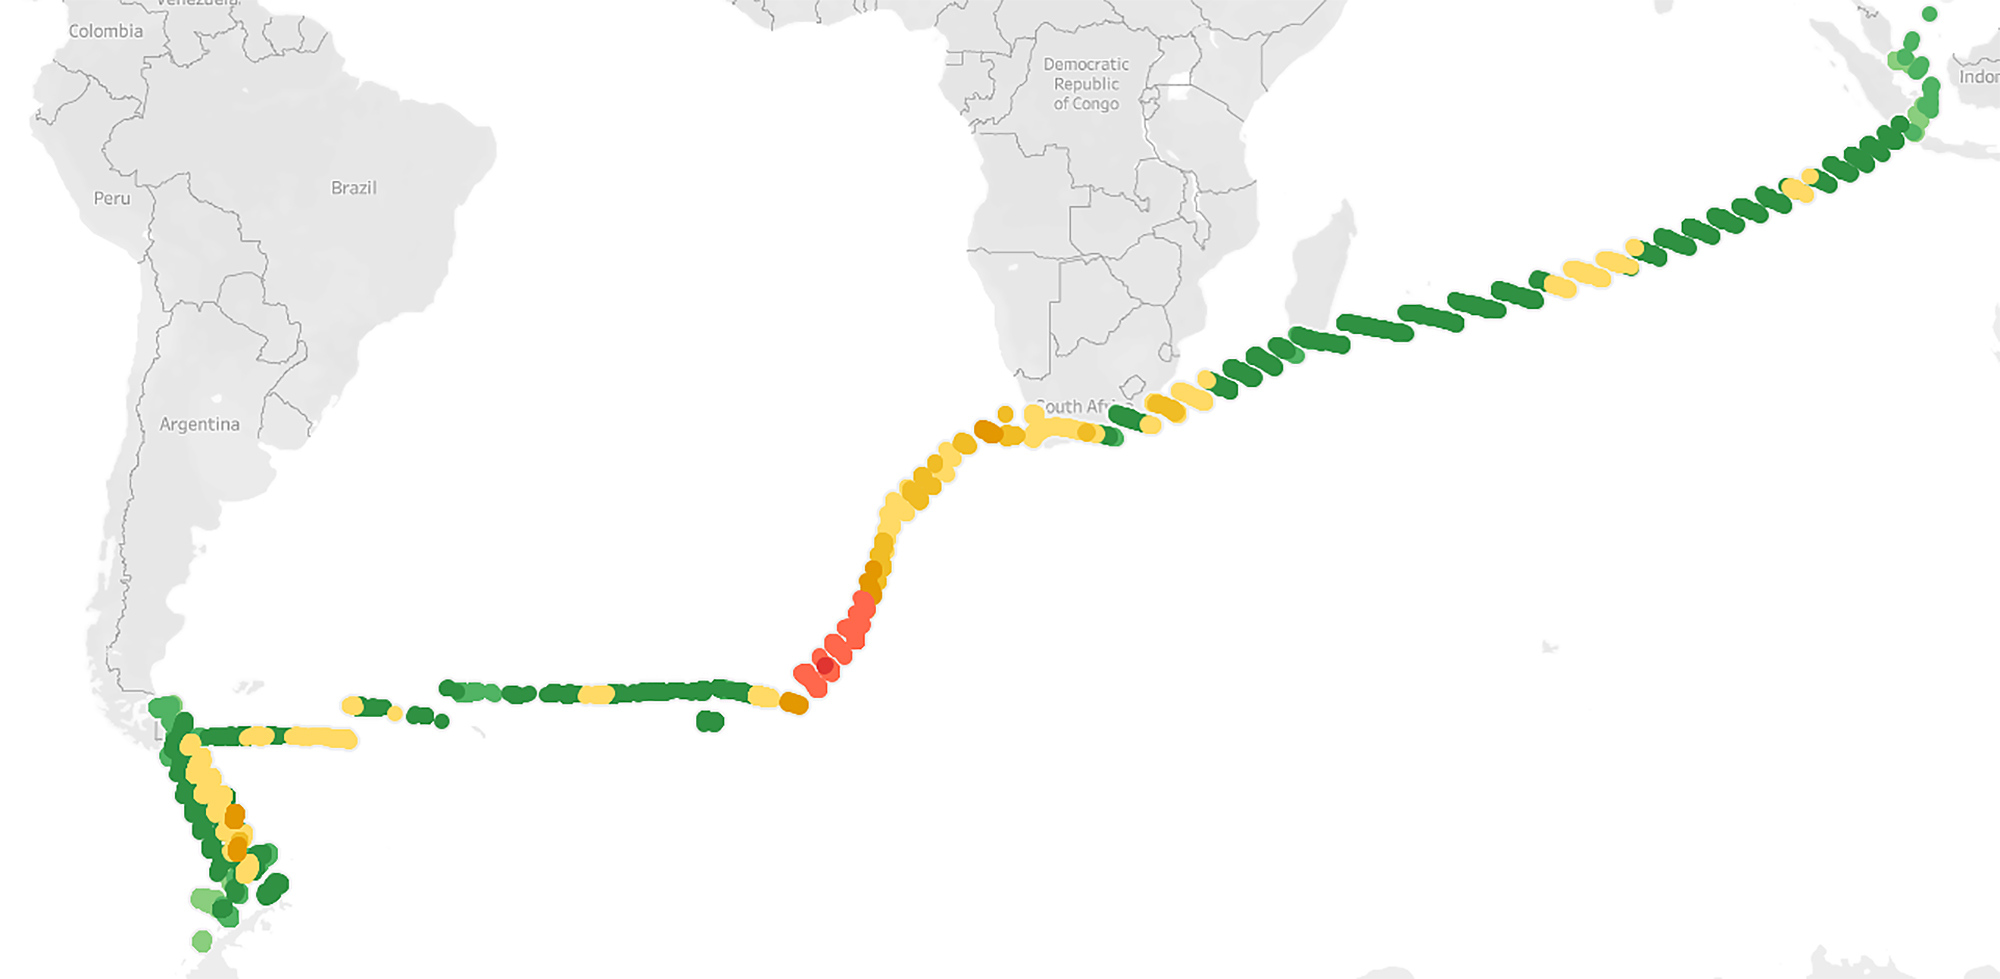 Wave tracking data from 'Greg Mortimer's transit across the Atlantic. Yellow colour refers to significant wave height 3-5 metres, while red colour indicates significant wave height 6-7 metres. This means that the largest waves in the red range vary from 10.8 to 12.6 metres.. At one point during this transit, significant wave height was 7.5 metres, i.e. a wave height up to 13.5 metres.